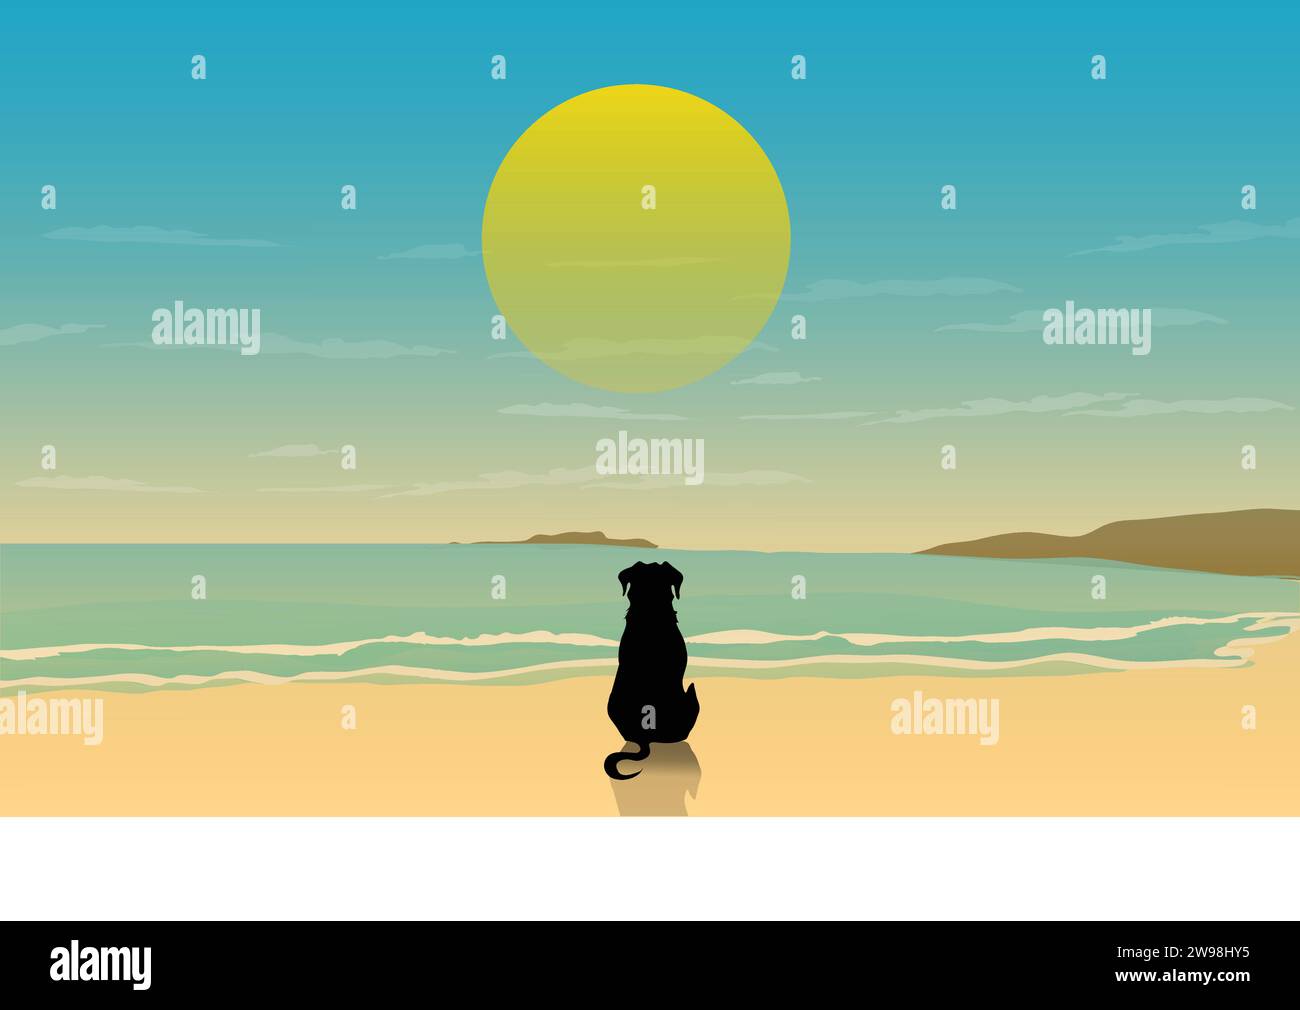 BEACH BACKGROUND WITH DOG Stock Vector